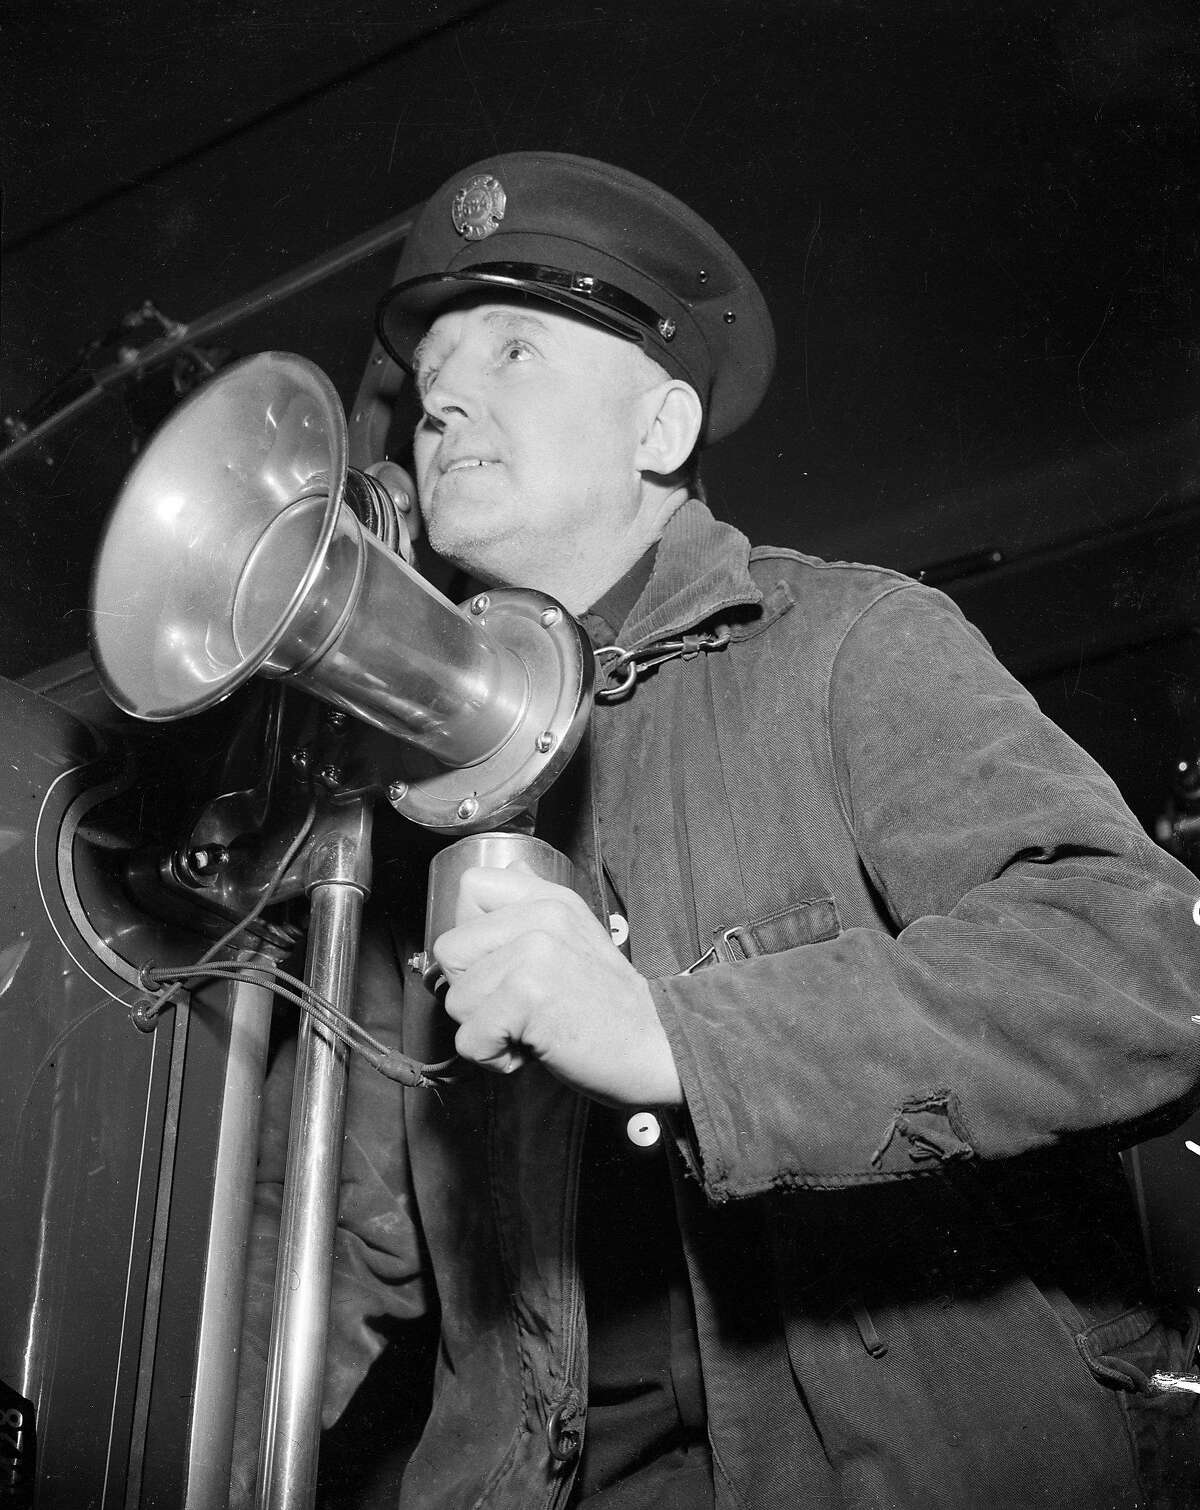 when "unidentified planes were sighted not far from san Francisco, Fireman Joseph V. Doherty of the Mint firehouse with used his fire truck siren to announce the blackout December 8, 1941